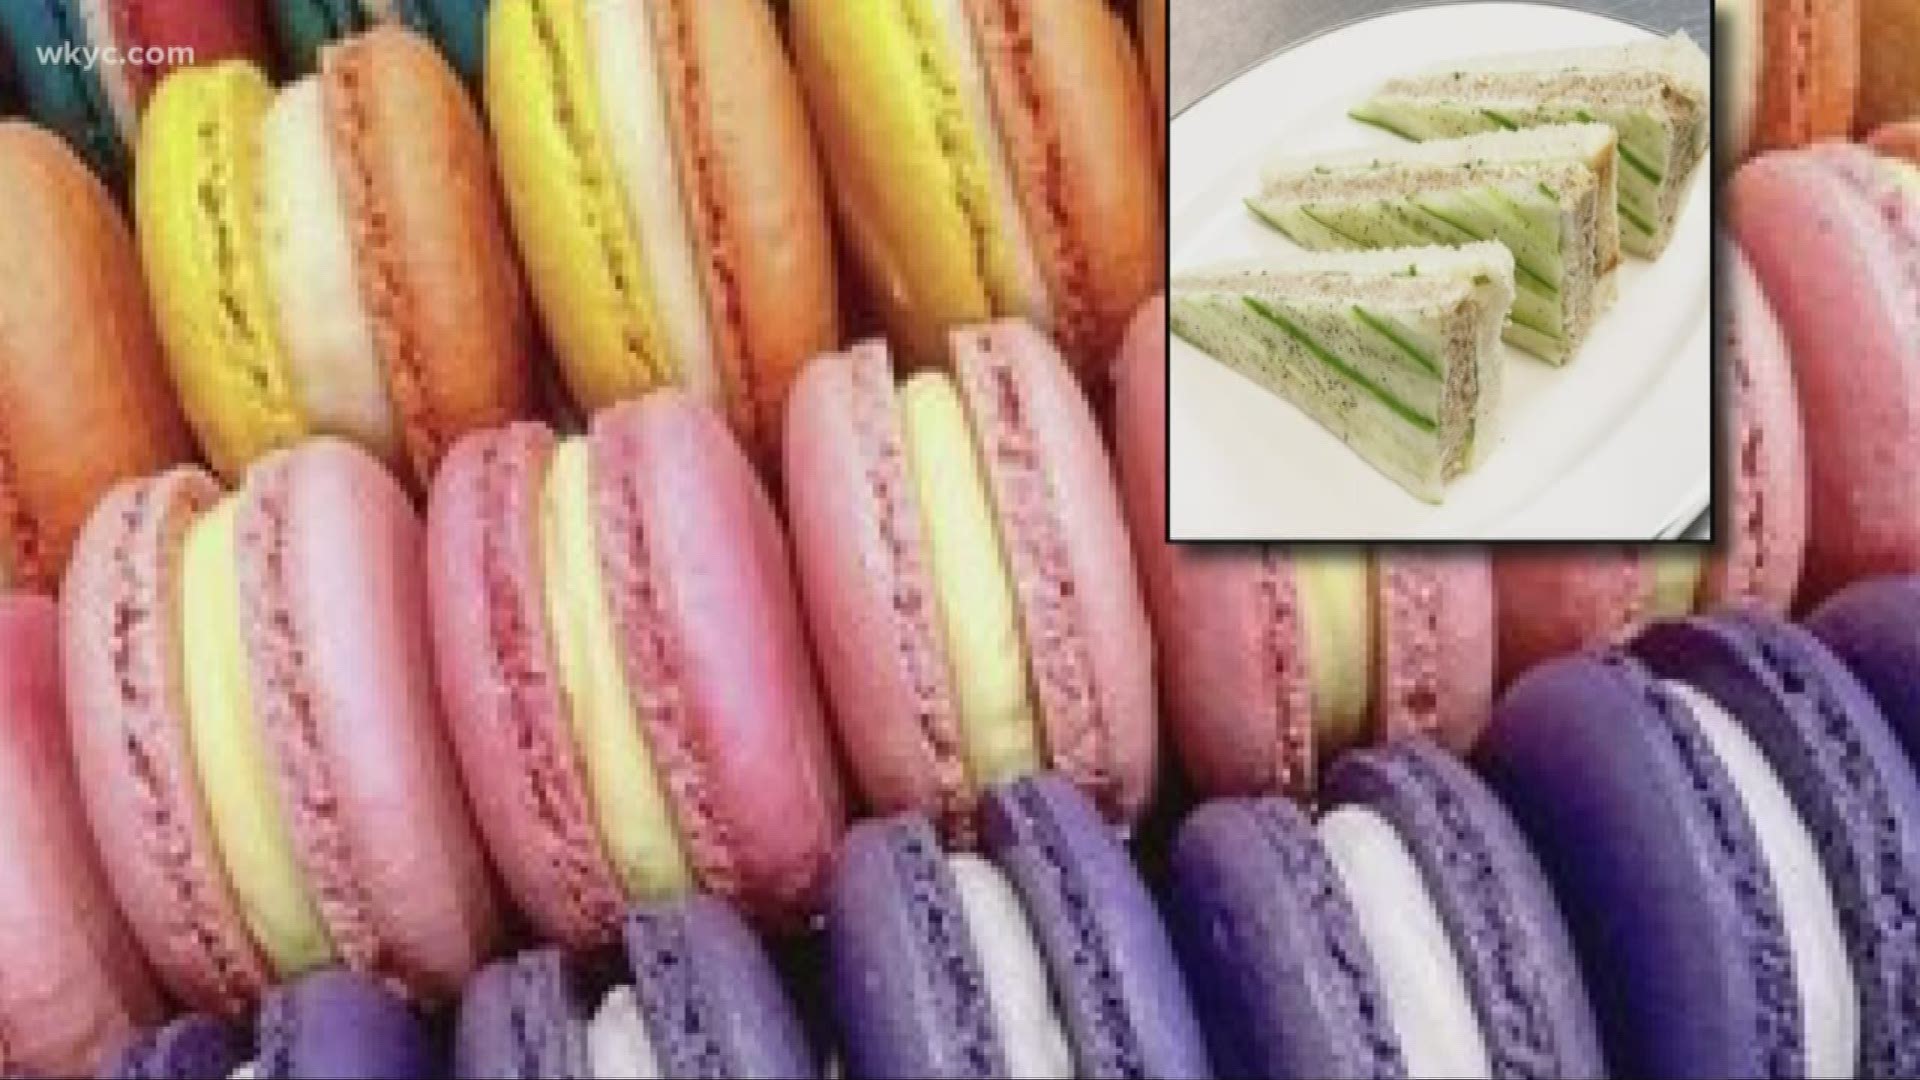 If you’re looking for a new experience, the Macaron Tea Room could be the perfect place for you. Jasmine Monroe shows us why it's one of her favorite places to go.